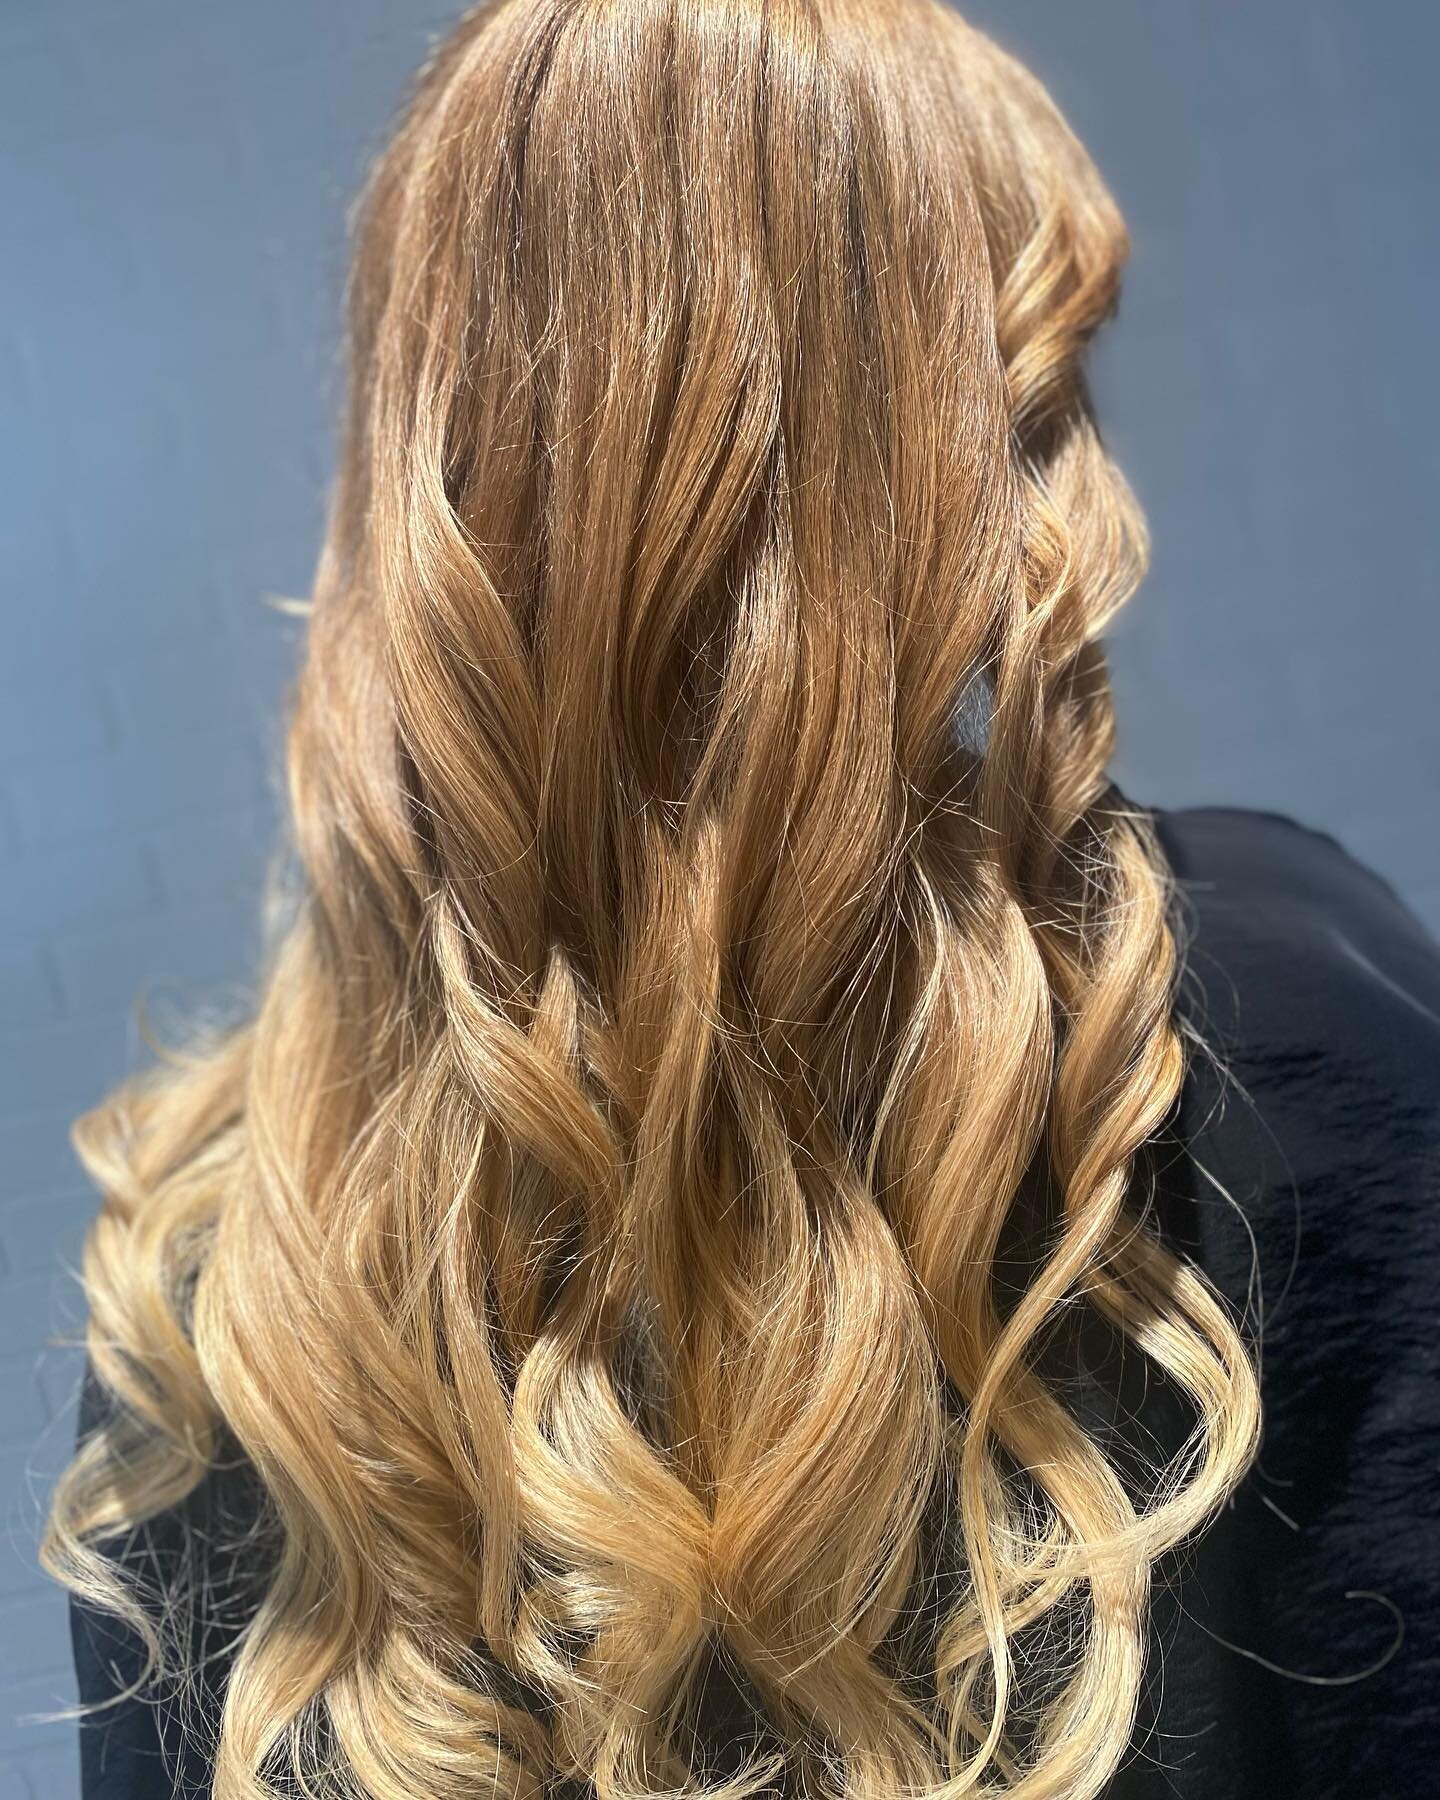 There nothing better than having the opportunity to color virgin hair! This was Sara&rsquo;s first visit with me and she has never had her hair colored before. I was so honored she trusted me to give her a natural blonde balayage and we are so in lov